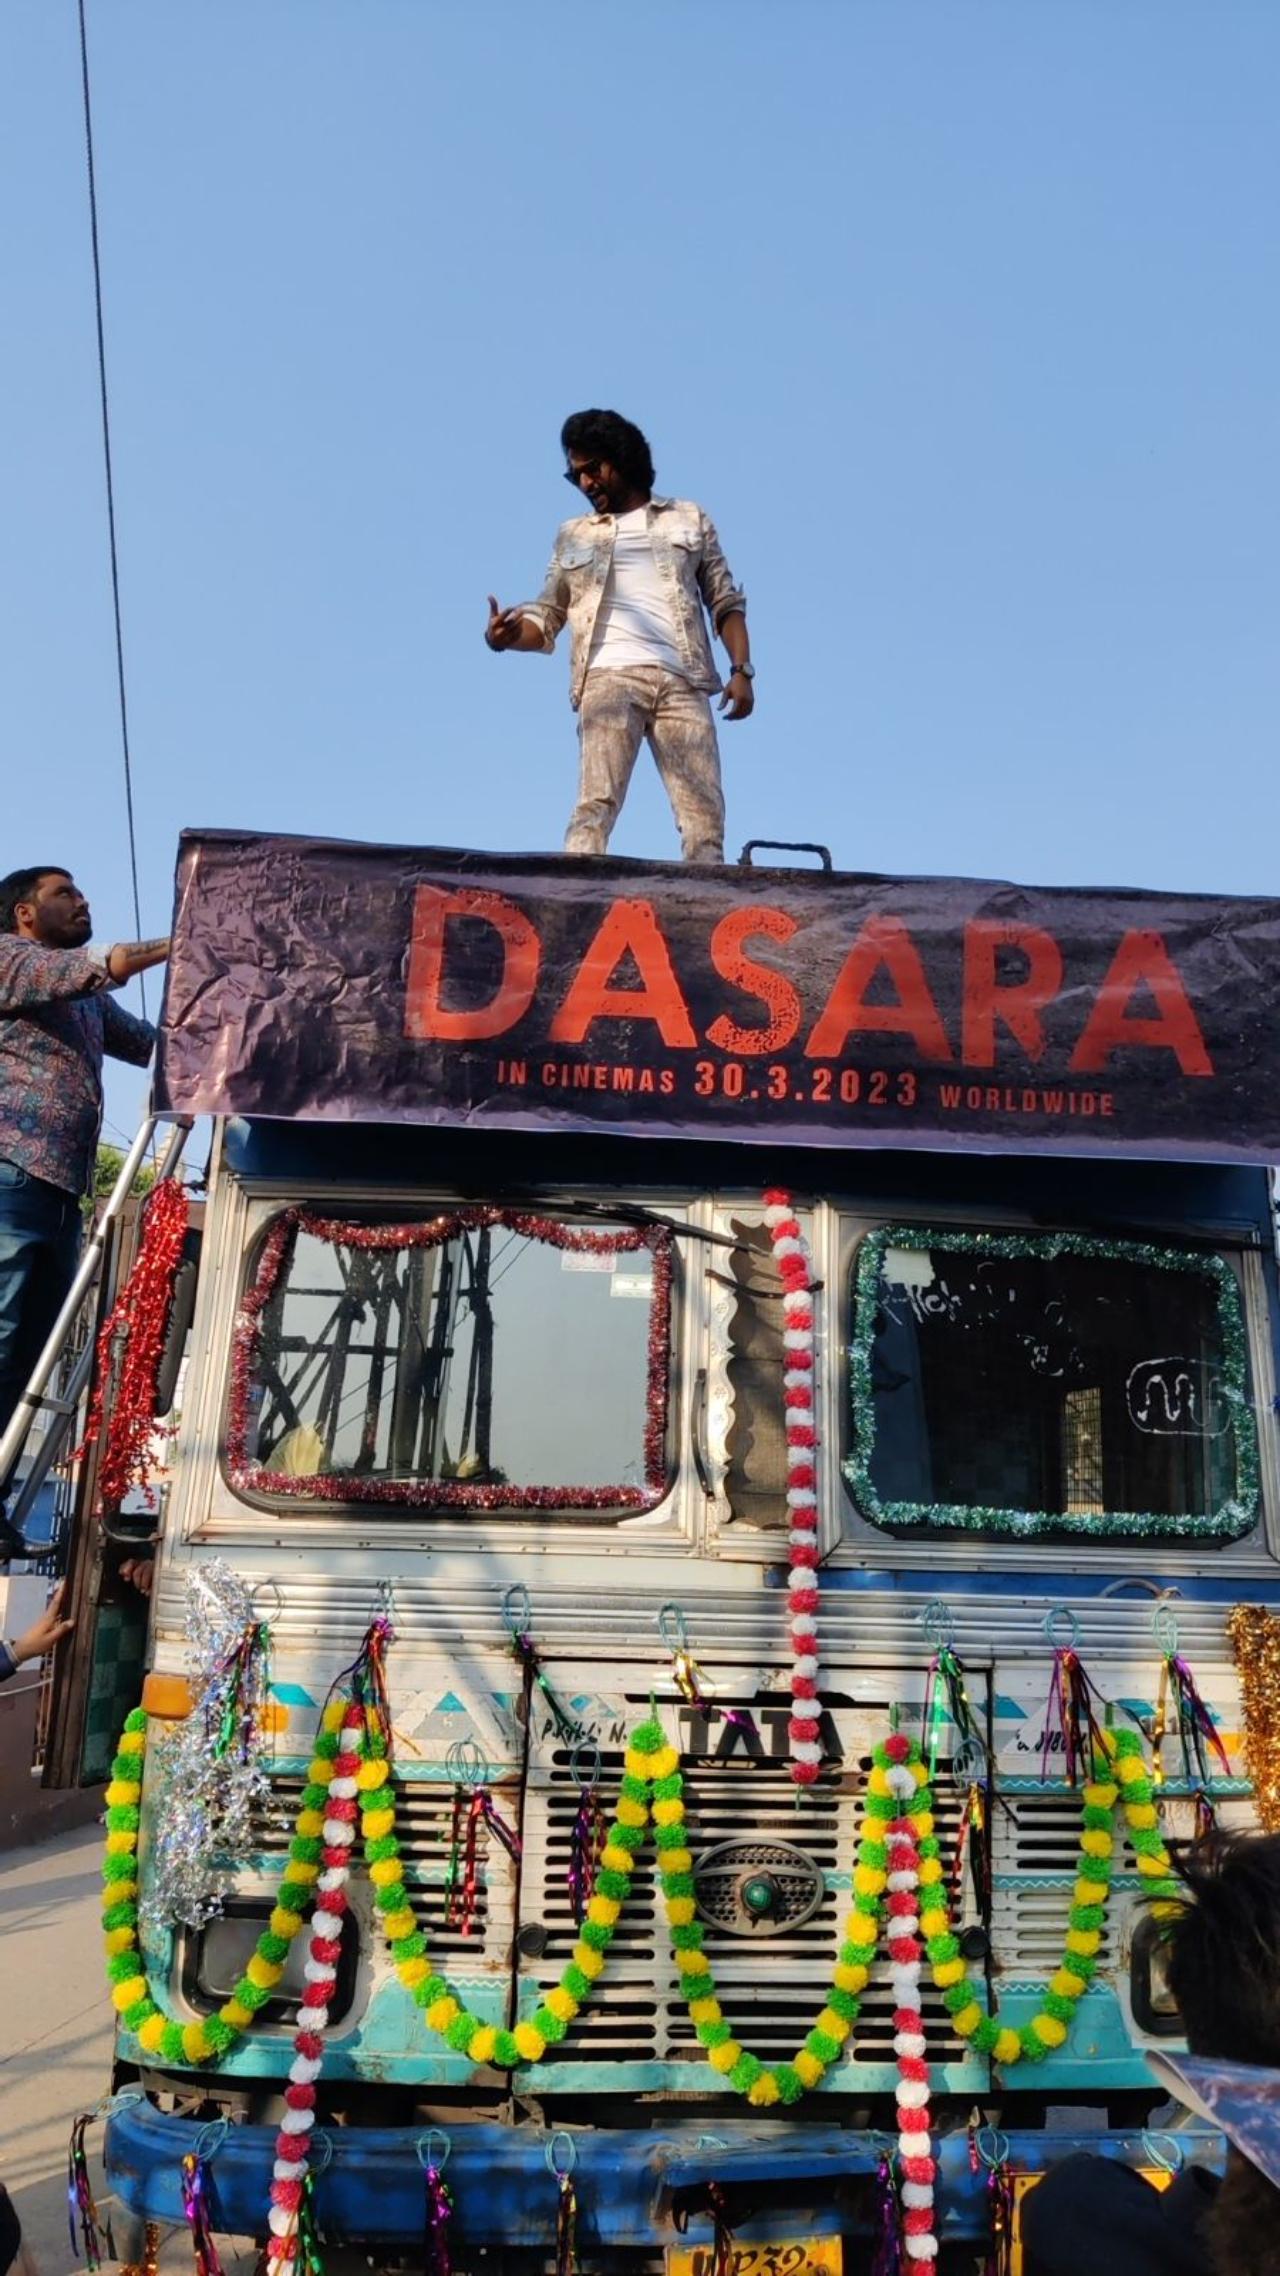 South Superstar Nani made a grand entry at the venue in a truck and the crowd couldn’t stop cheering! The actor who is known for his iconic performances down south is already making waves in the North market as he brings his Pan-India film to fans from all corners of the country